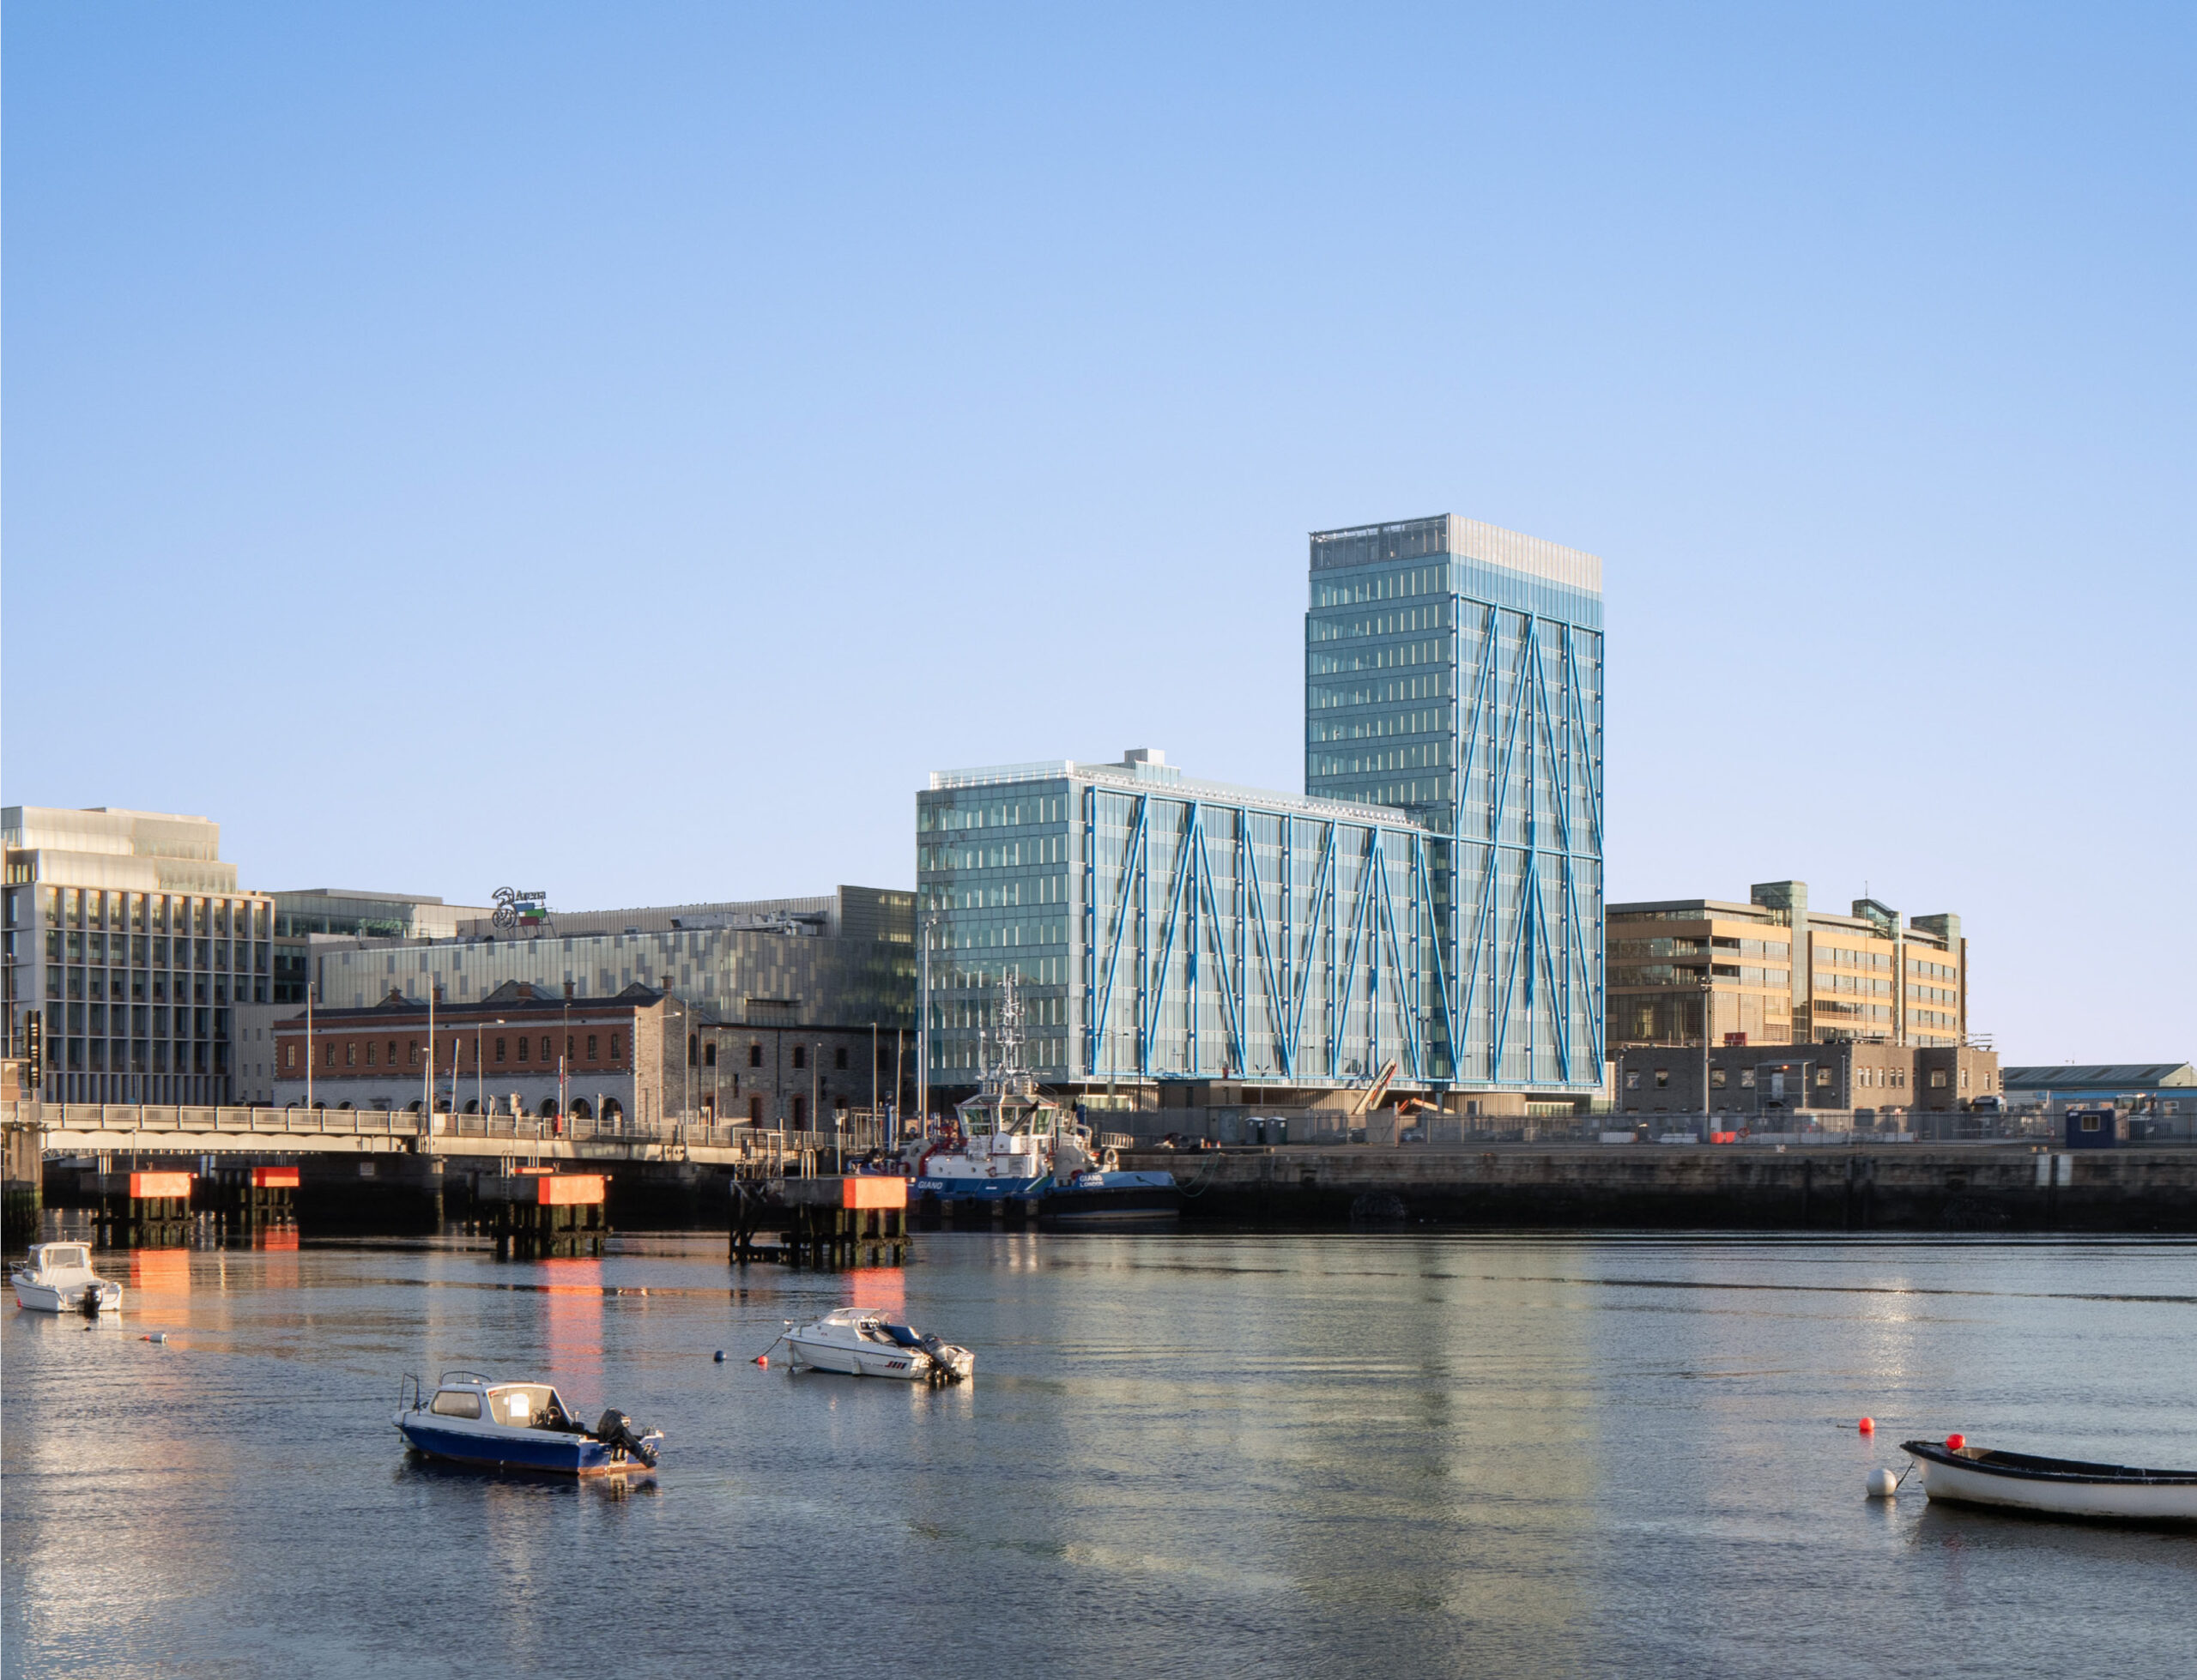 View of tall building with glass and metal exterior from across River Liffey